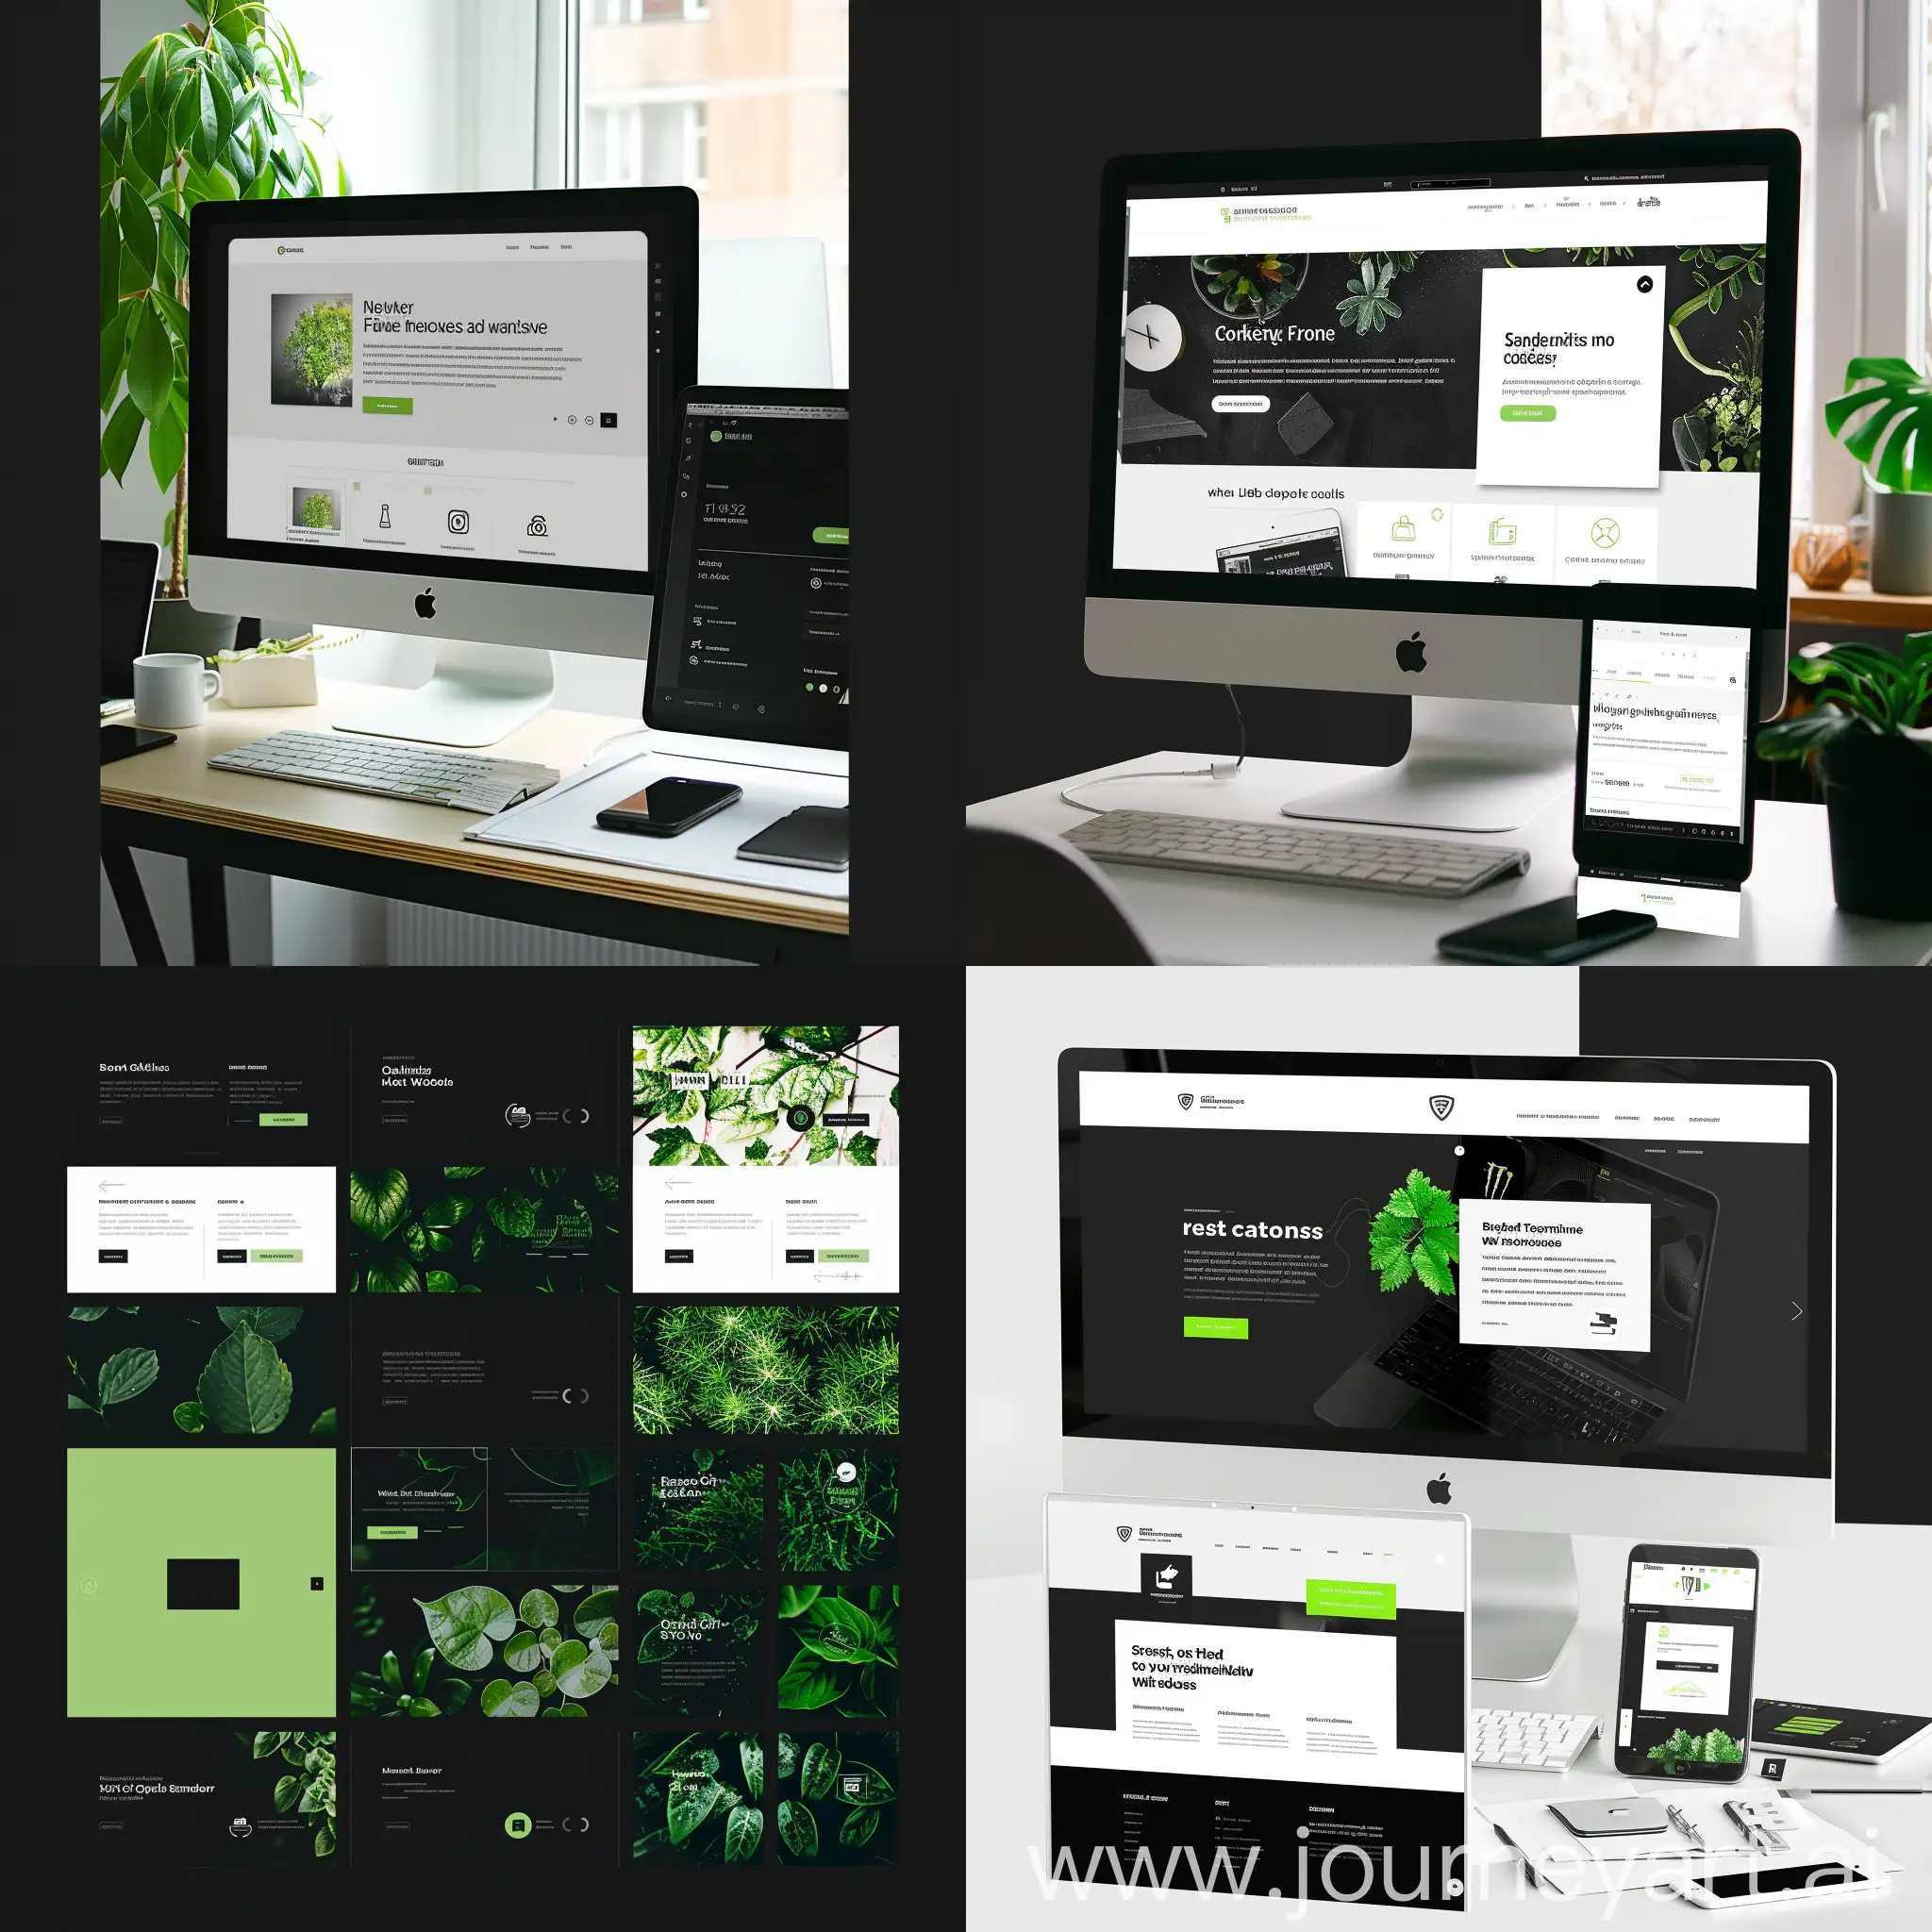 Finalize the website design shown in the picture. Make it more modern by using black, white and green colors